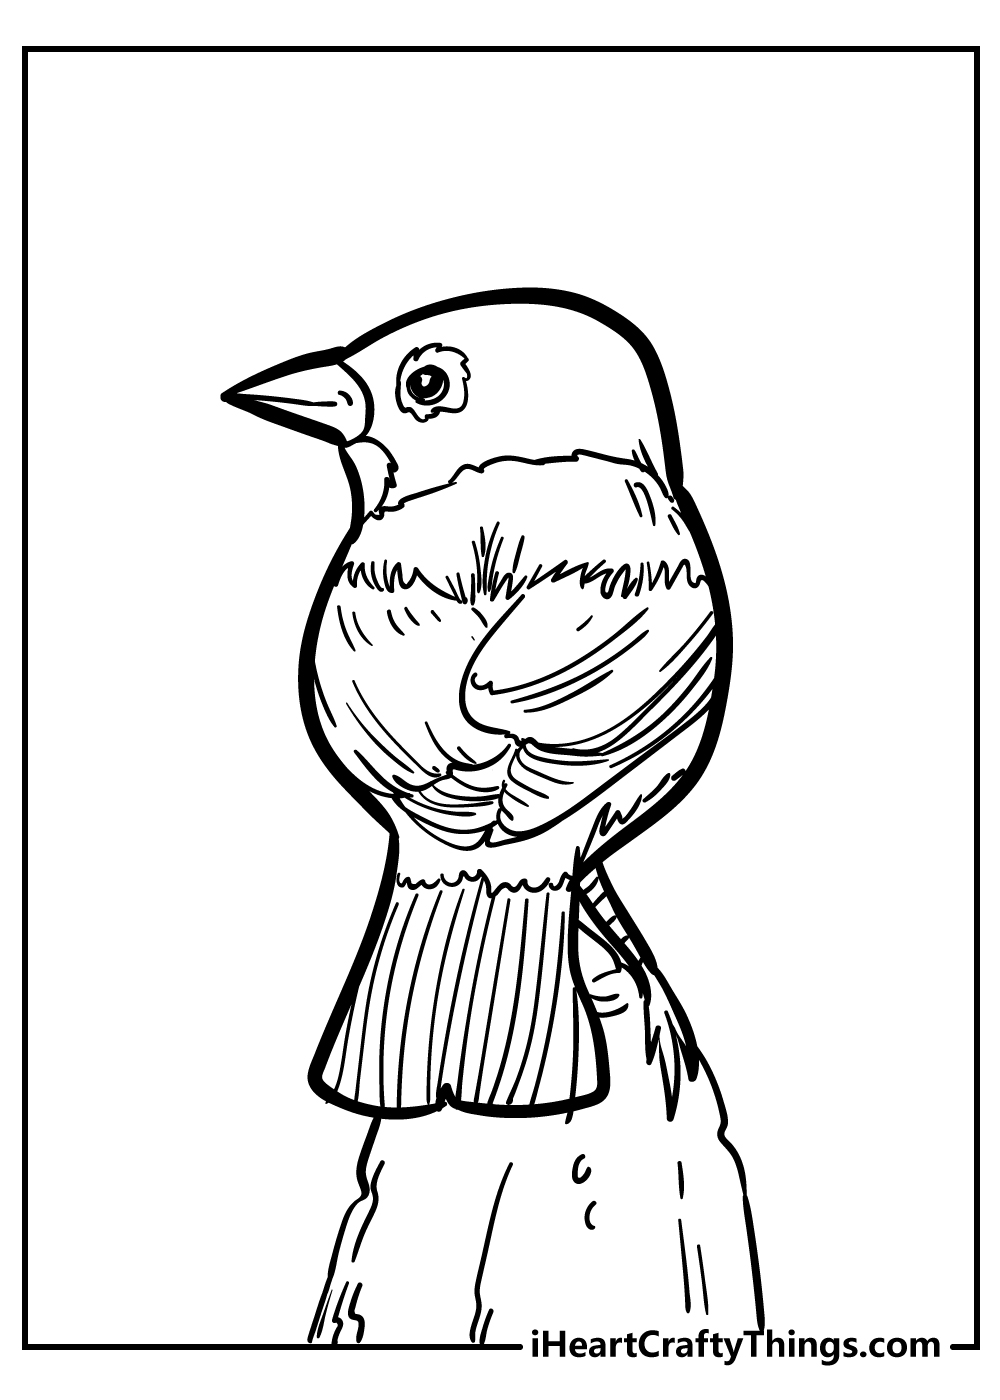 Bird Coloring Pages for preschoolers free printable